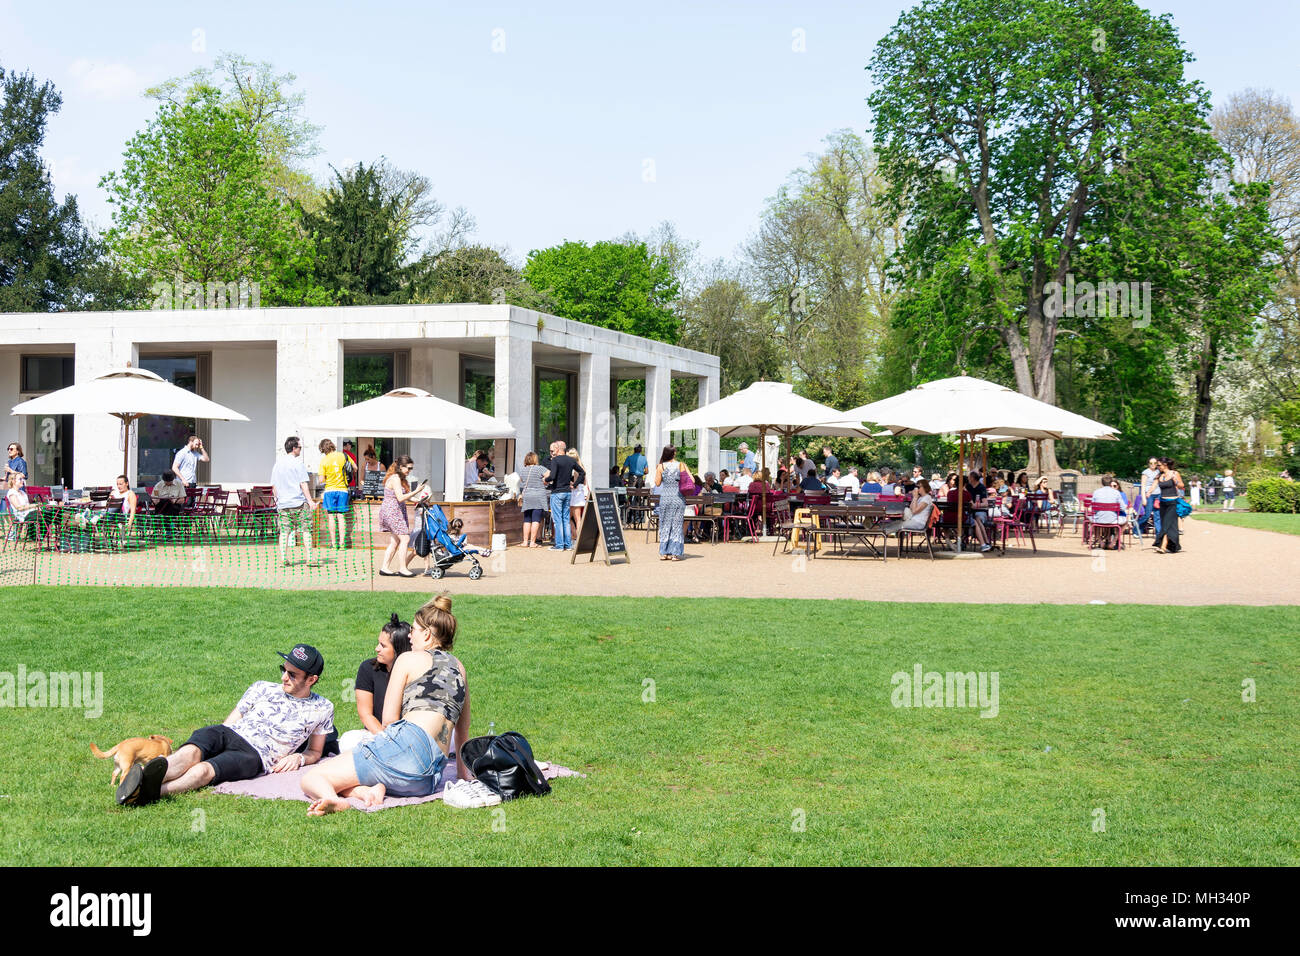 Chiswick House Cafe à Chiswick House gardens, Burlington Road, Ealing, London Borough of London, Greater London, Angleterre, Royaume-Uni Banque D'Images